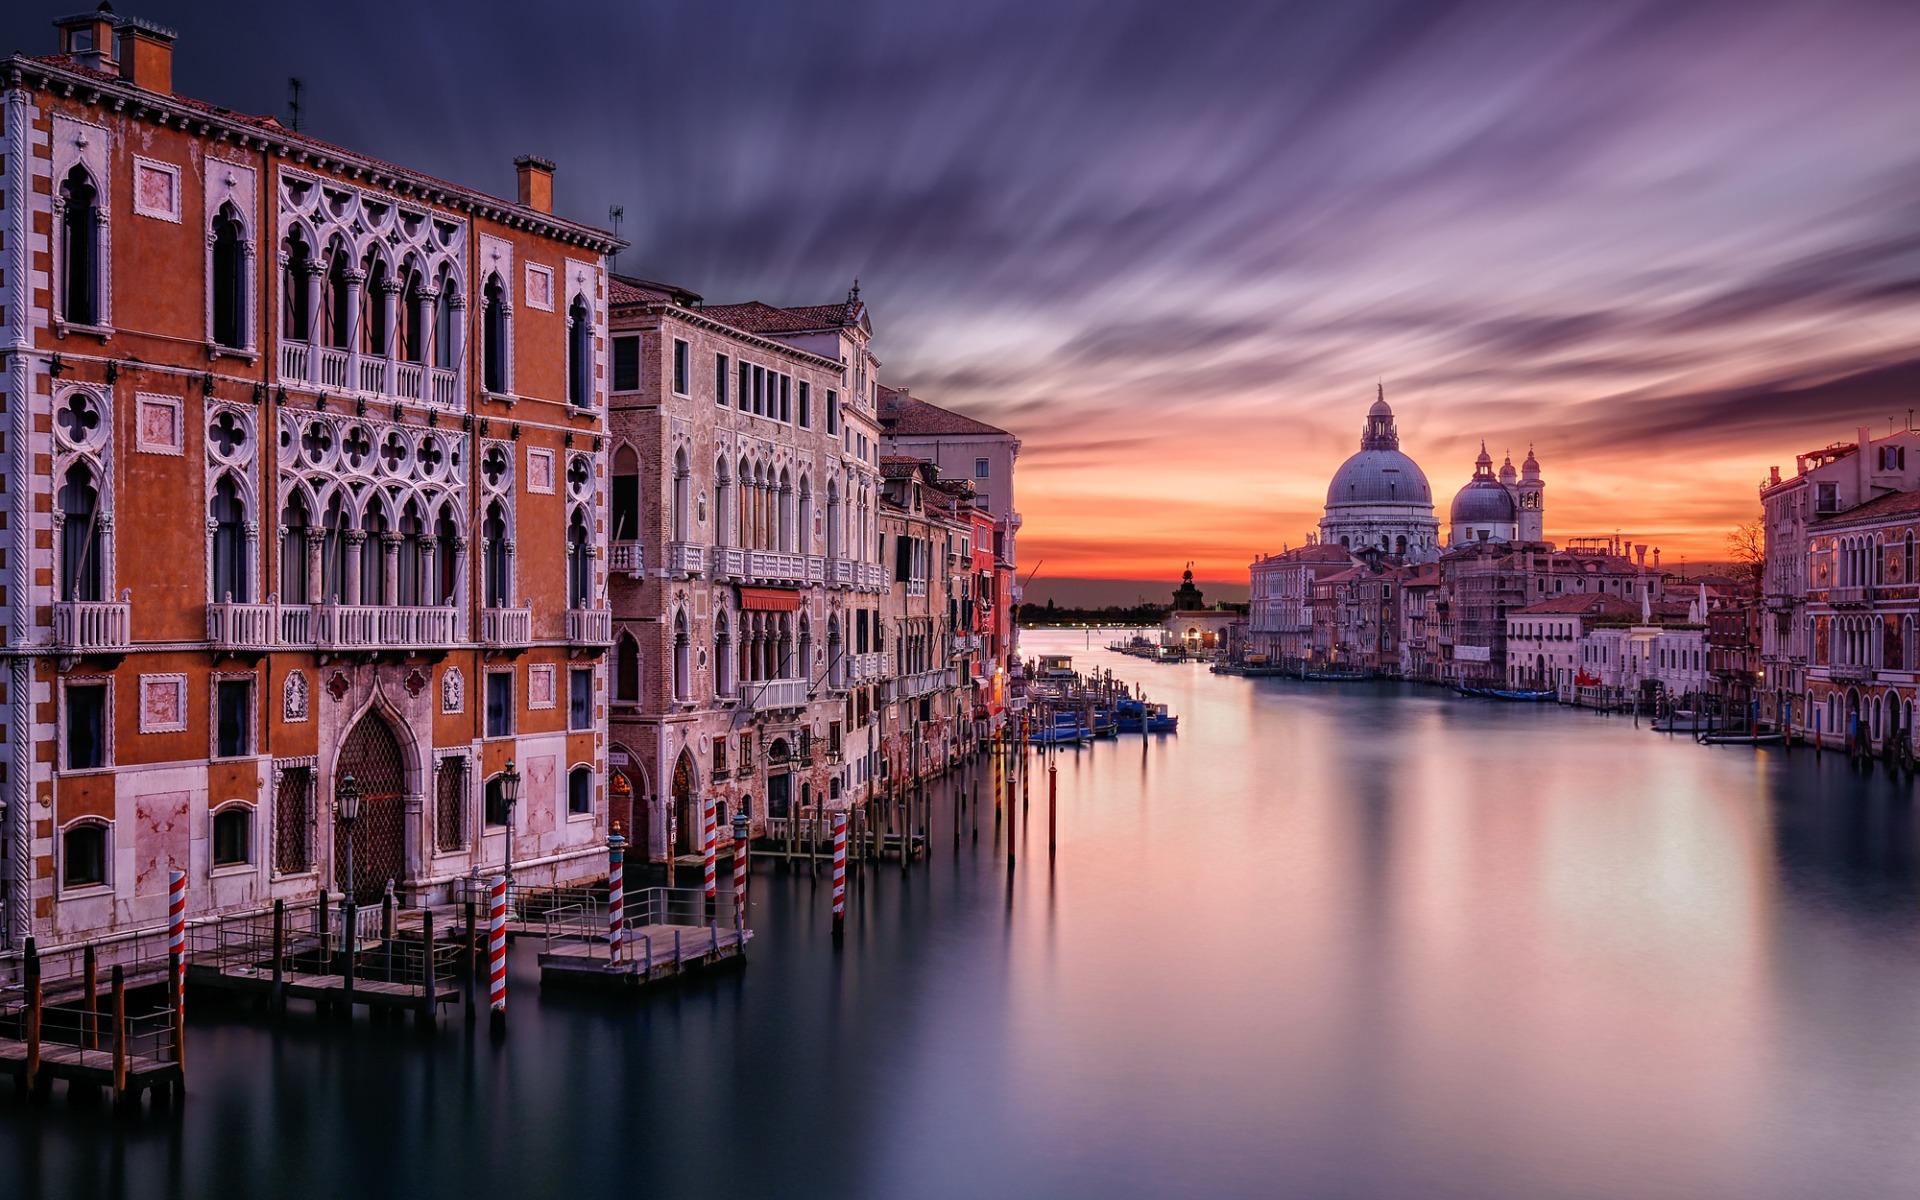 venice, man made, architecture, boat, building, grand canal, italy, cities HD wallpaper